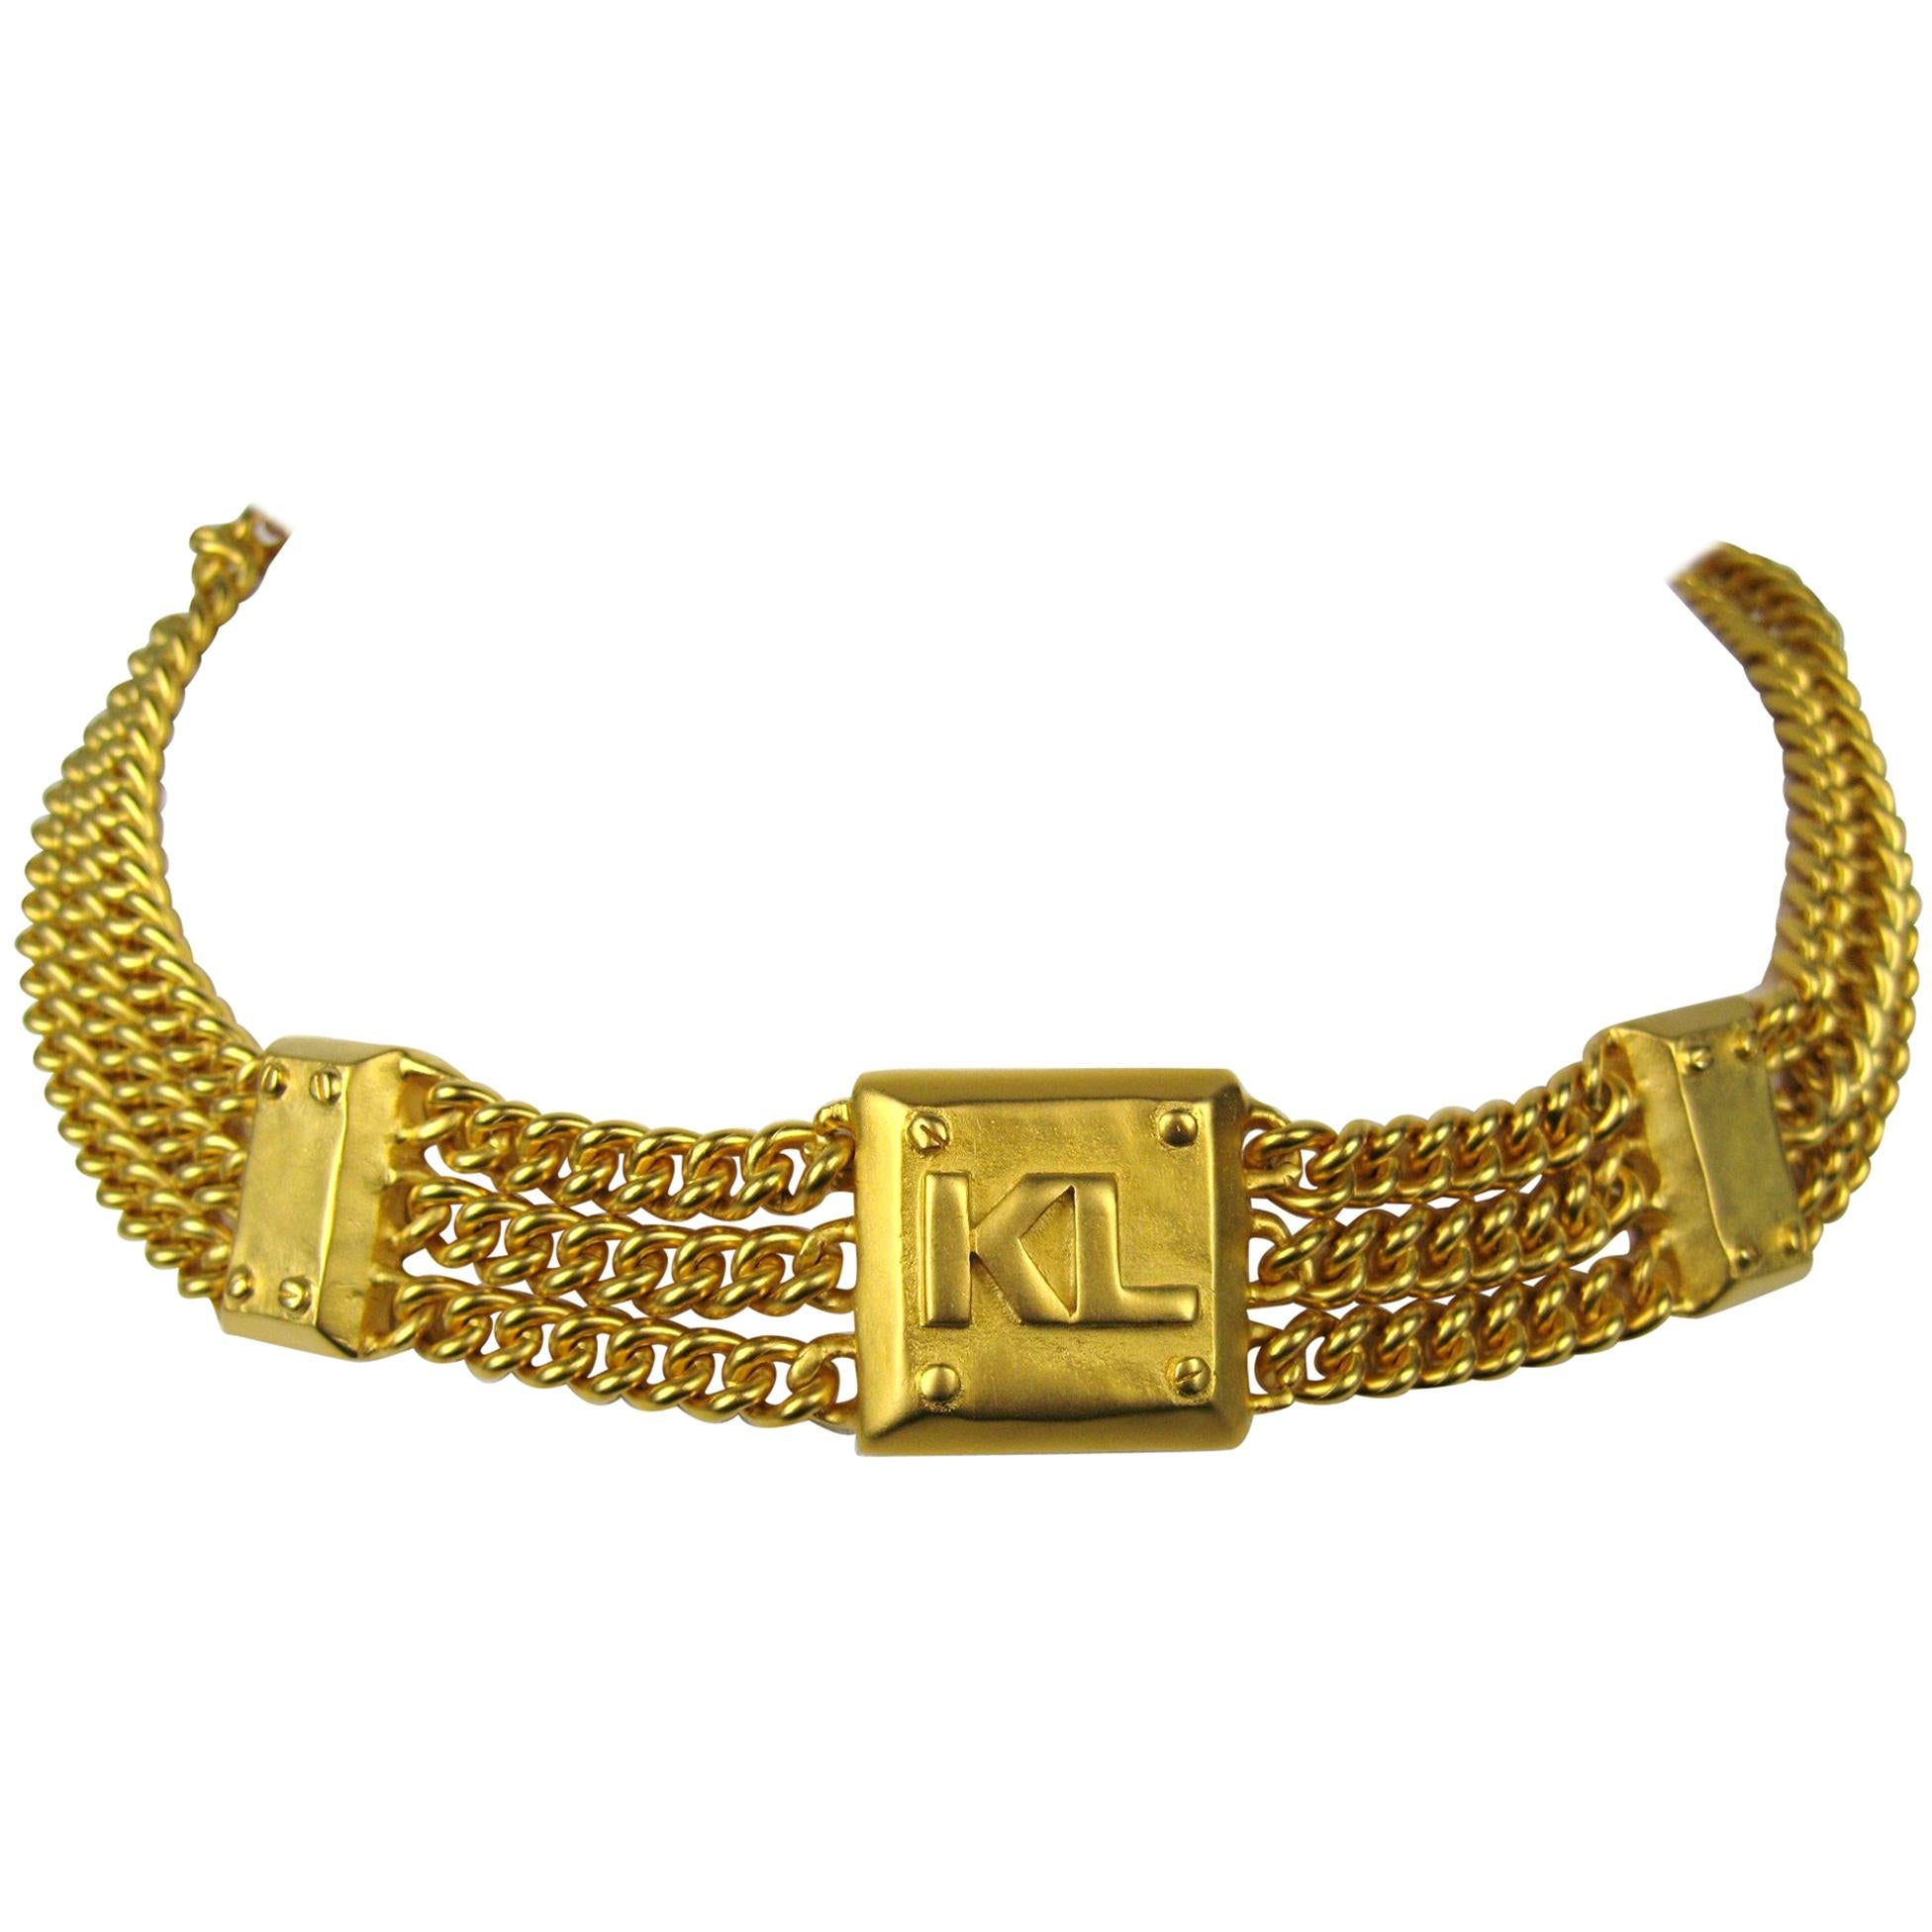 1990's Karl Lagerfeld Gold Gilt Choker Chain Necklace, New never worn 1990s 